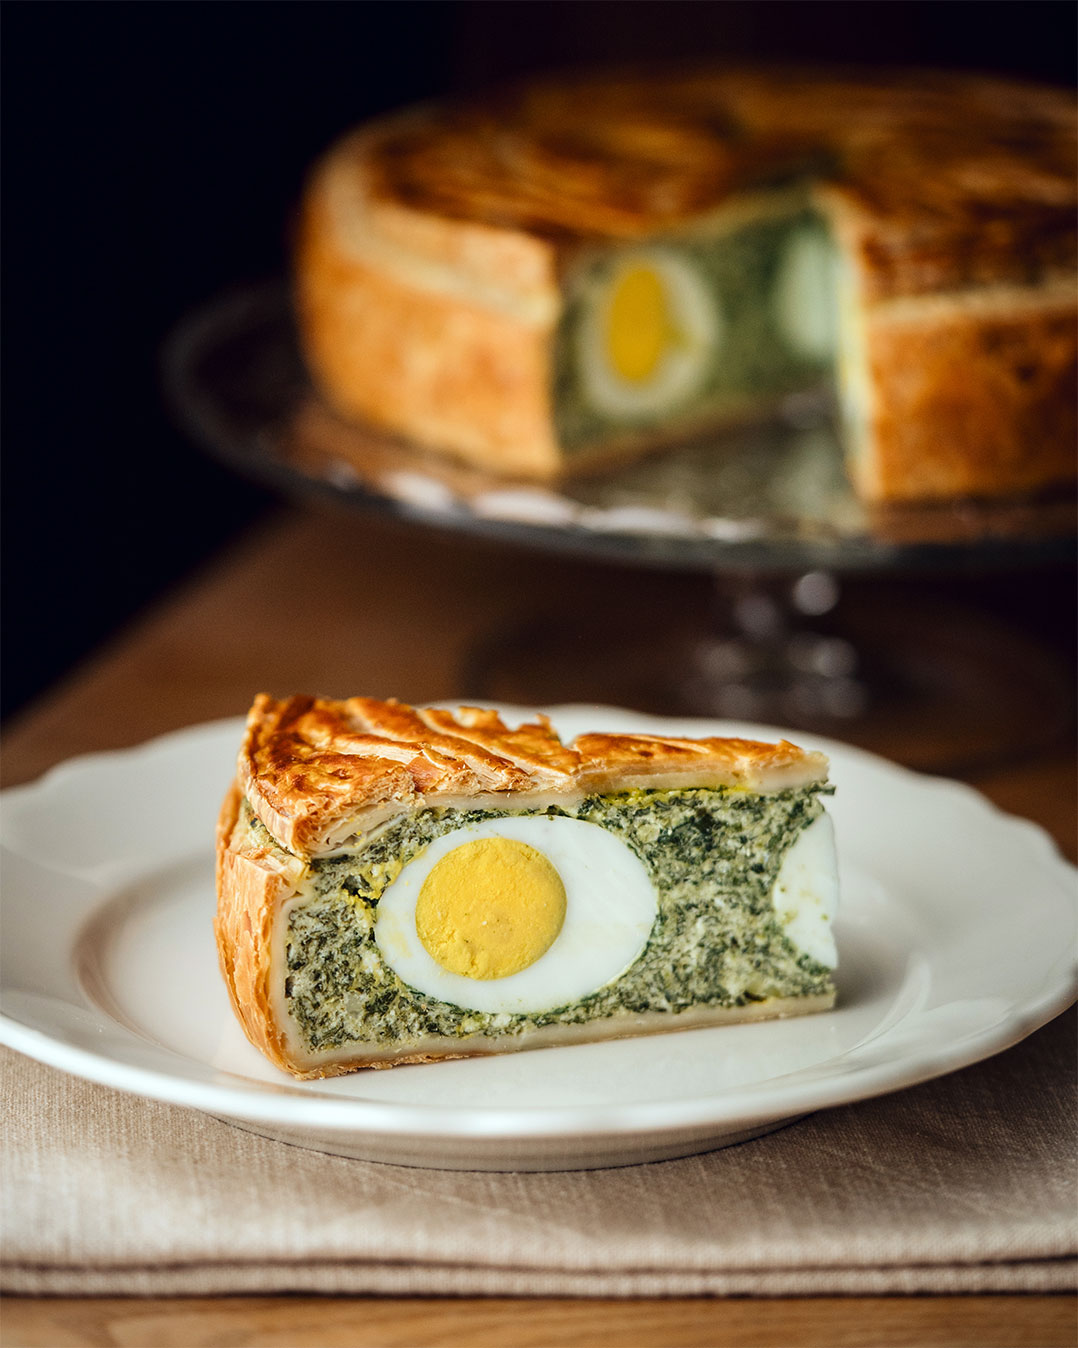 The savoury Italian torta pasqualina oozes spring, right down to its name—pasqualina meaning “Easter.” As you might have guessed, it’s the perfect Easter lunch showstopper! Filled to the brim with crunchy greens, silky ricotta, and whole eggs, the torta pasqualina is nutritious, festive and (most importantly) delicious.